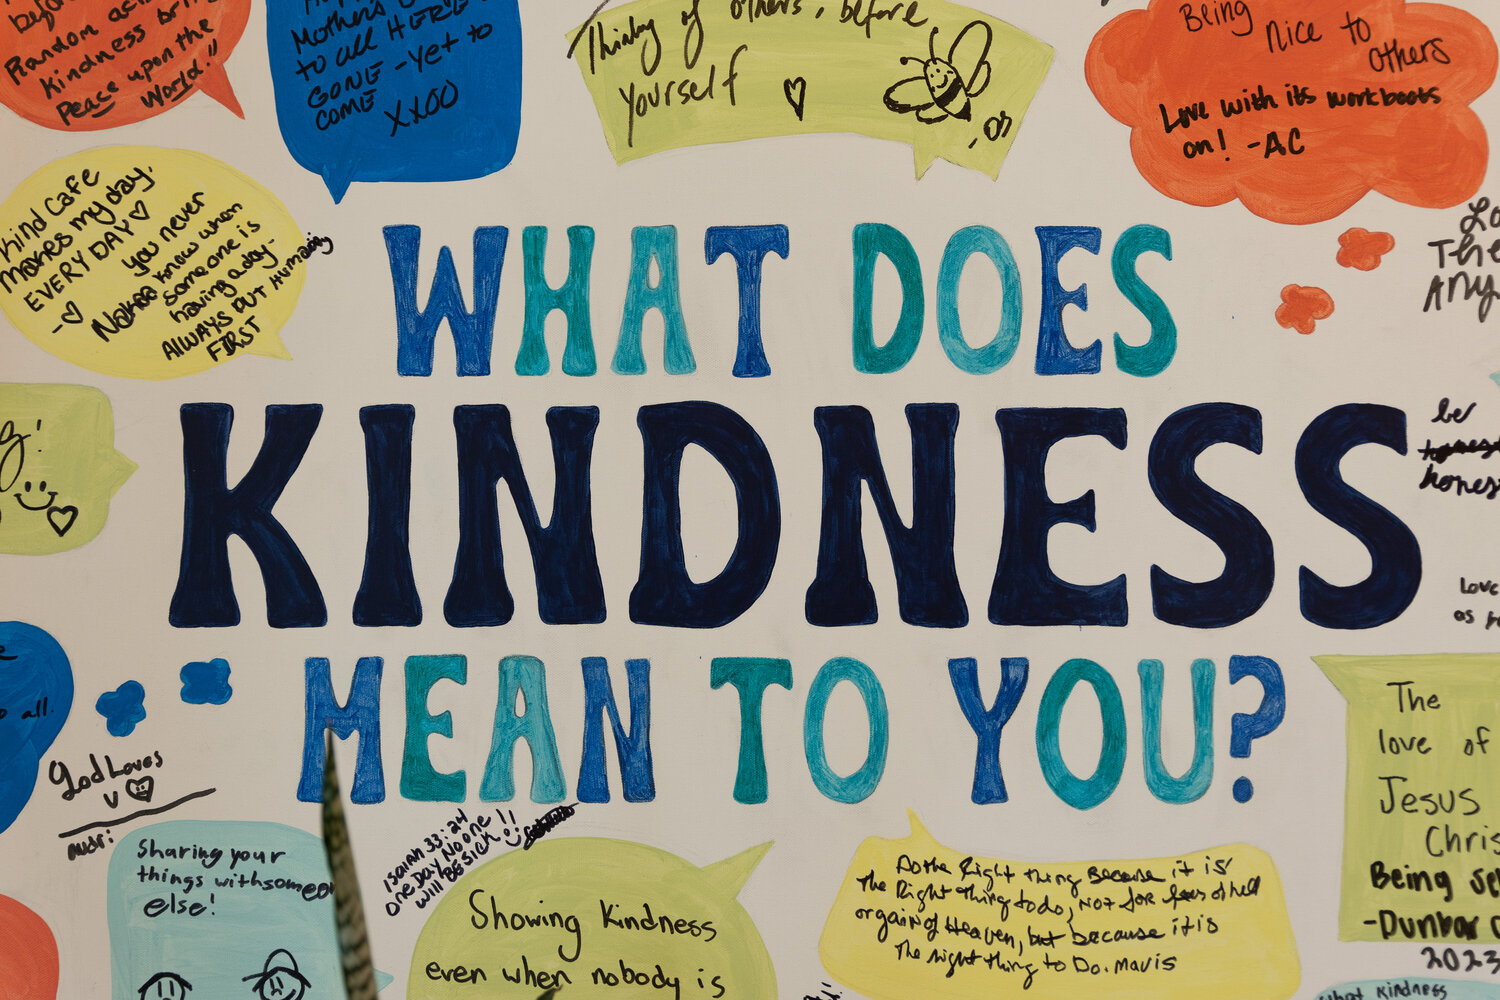 Upon entering Kind Cafe, a sign that reads "What does kindness mean to you?" is located to the left of the entrance door. Customers are able to fill in the spaces to explain their definition of kindness.